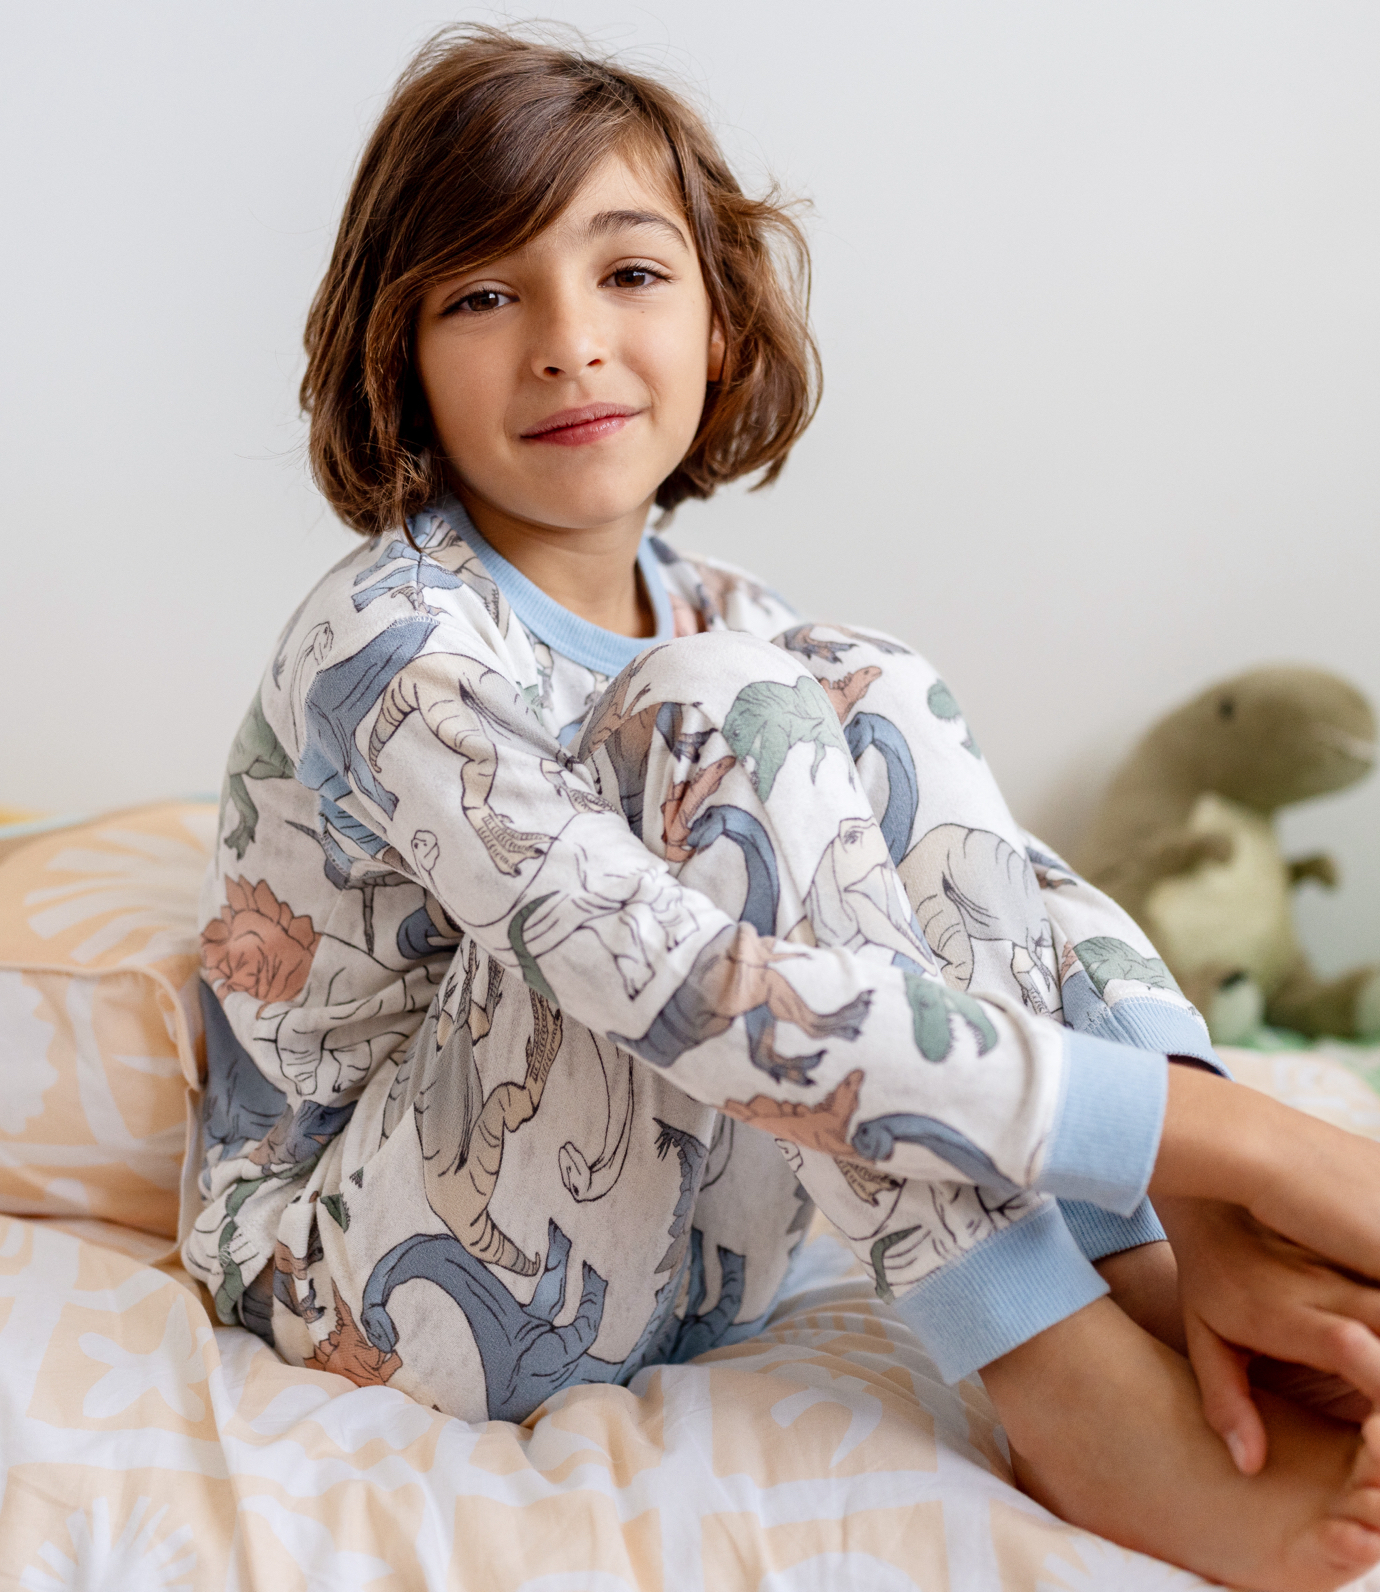 Supersoft pyjamas buy one, get one 50% off